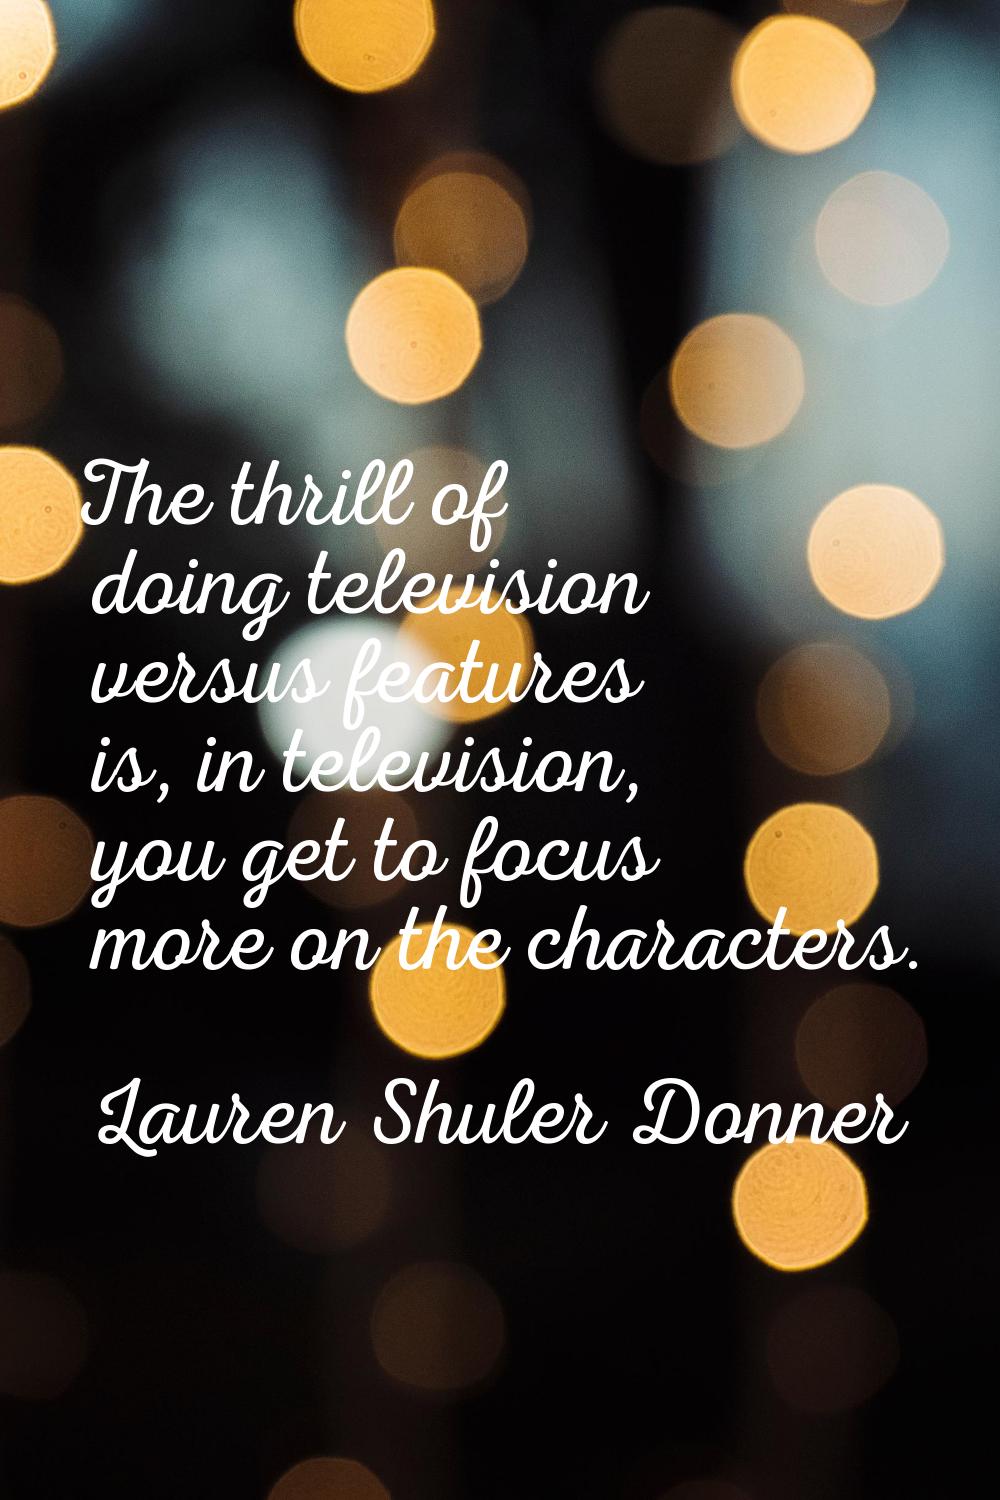 The thrill of doing television versus features is, in television, you get to focus more on the char